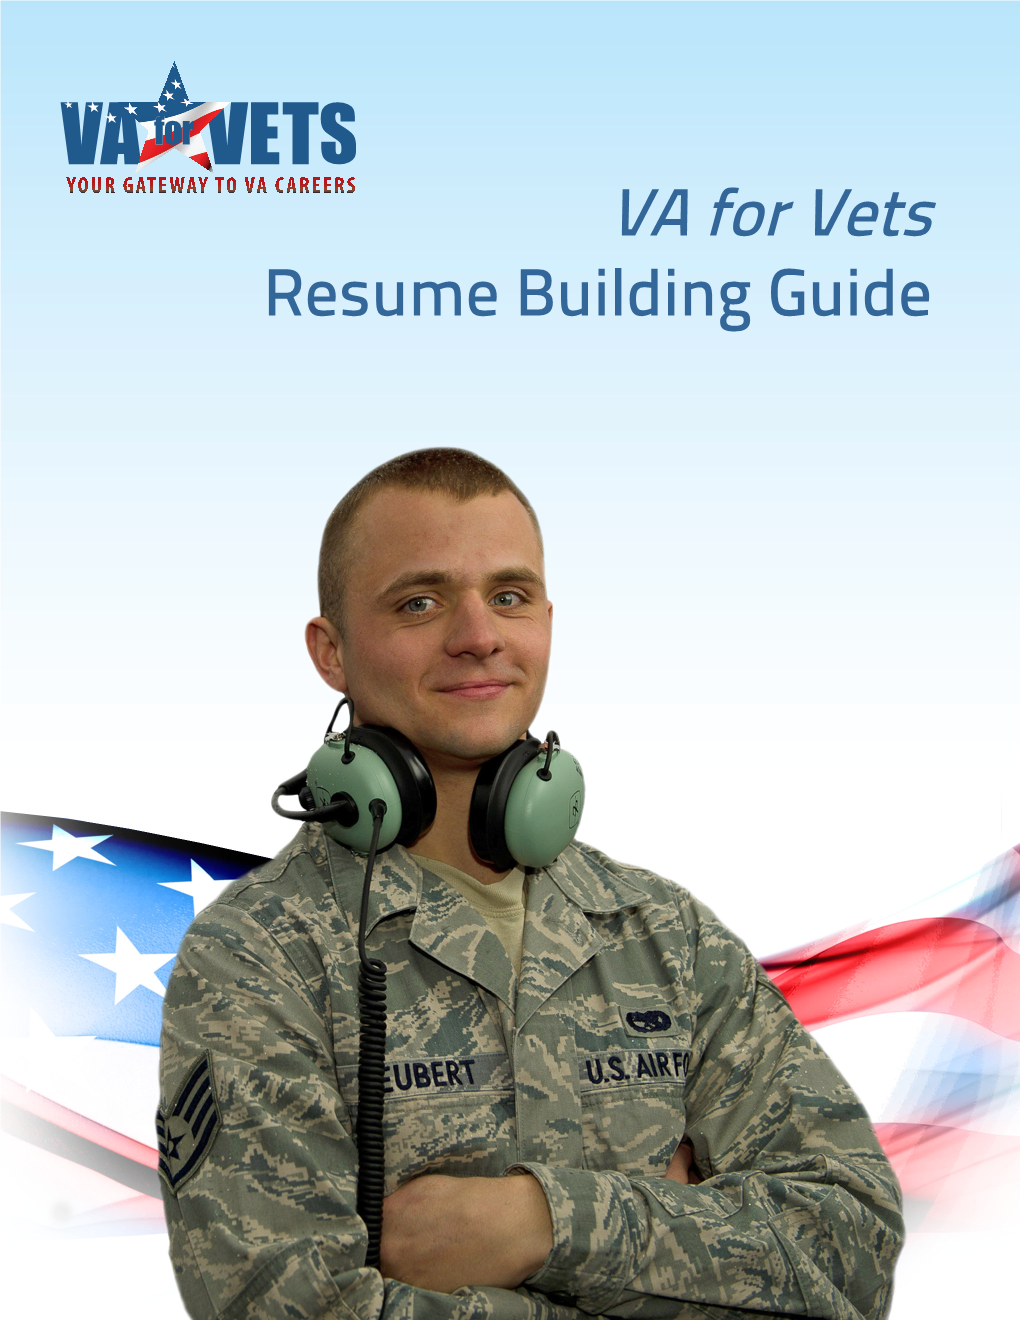 Resume Building Guide YOUR GATEWAY to VA CAREERS